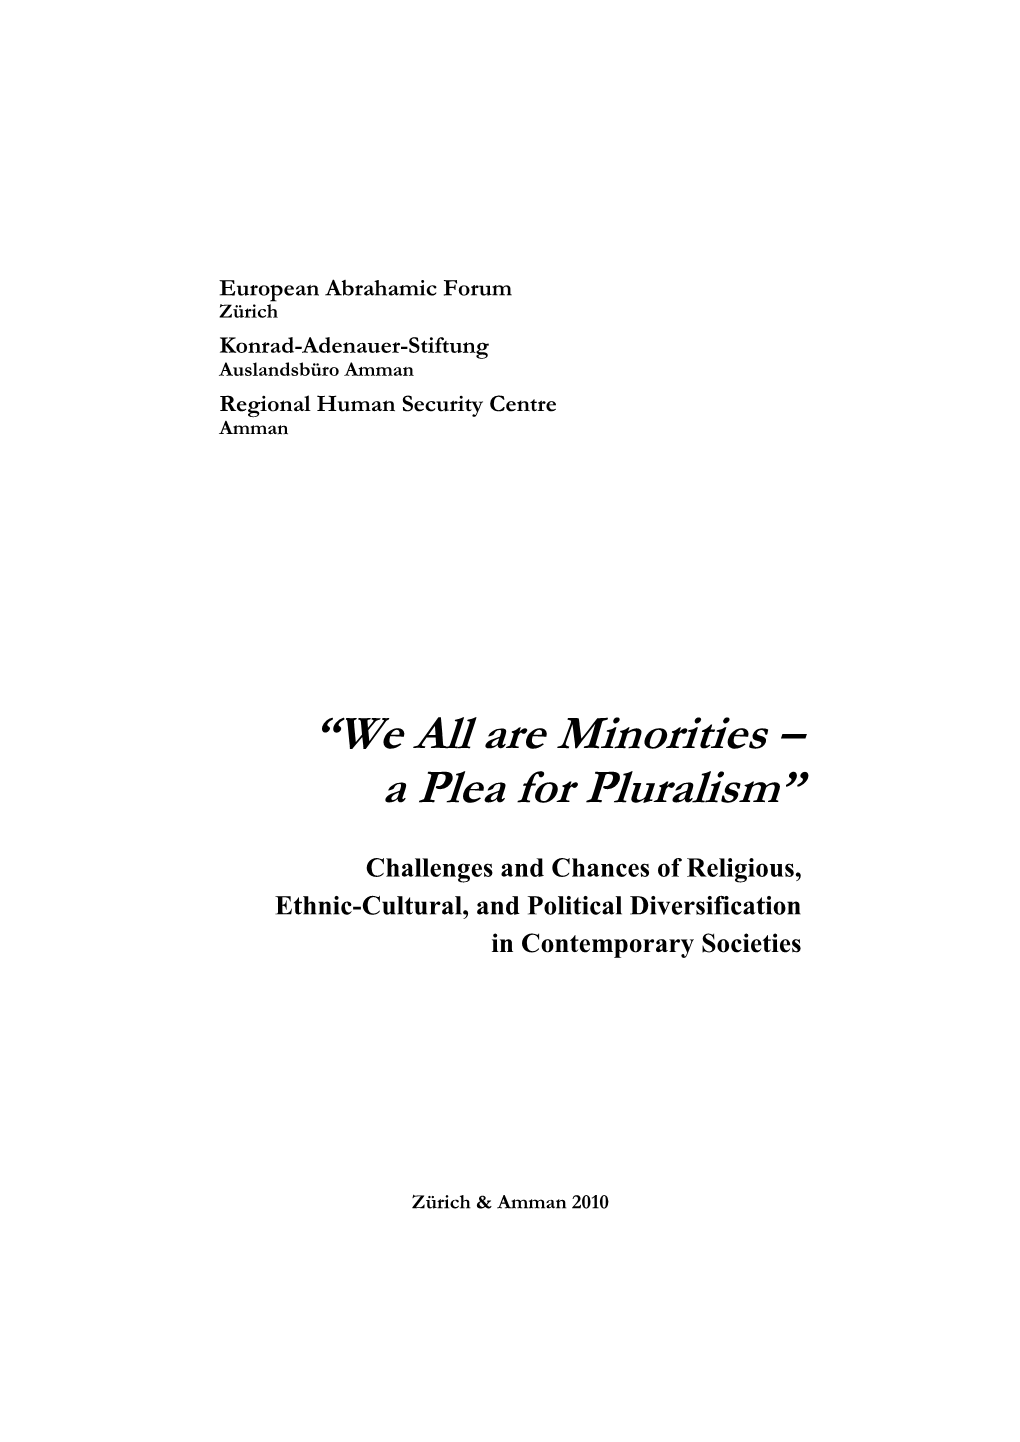 “We All Are Minorities – a Plea for Pluralism”